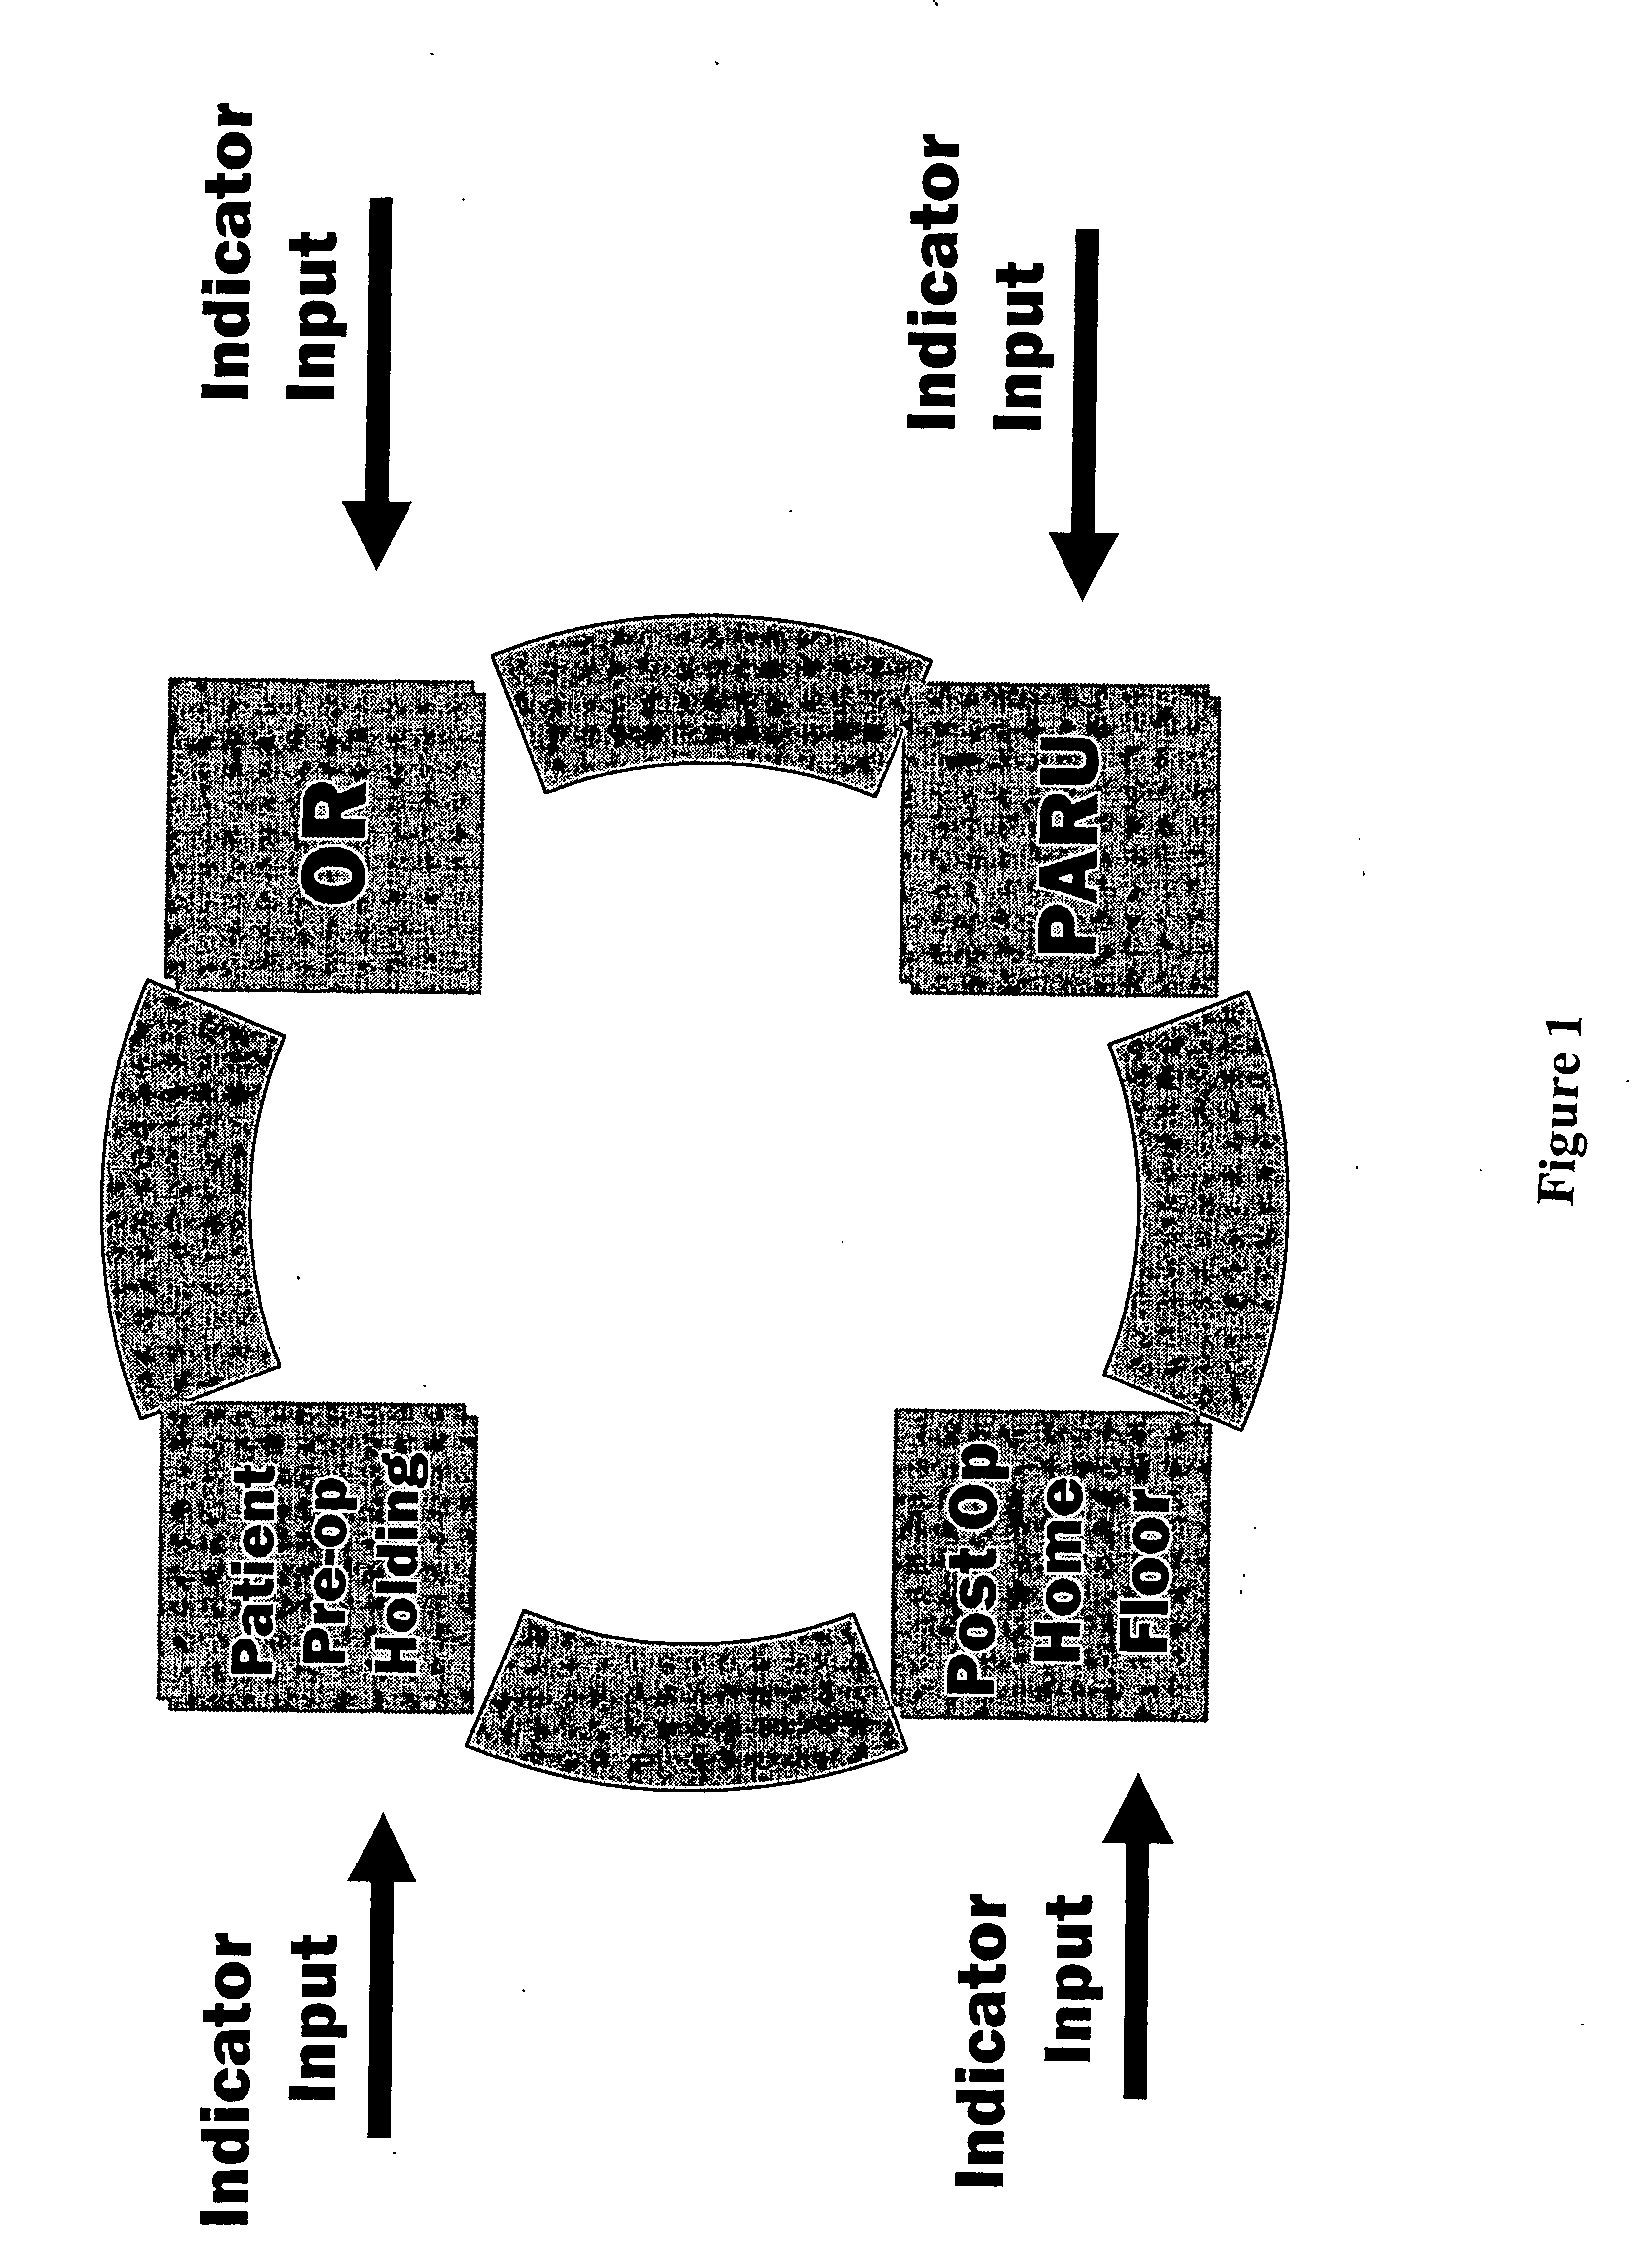 Method and system for improving the quality of service and care in a healthcare organization